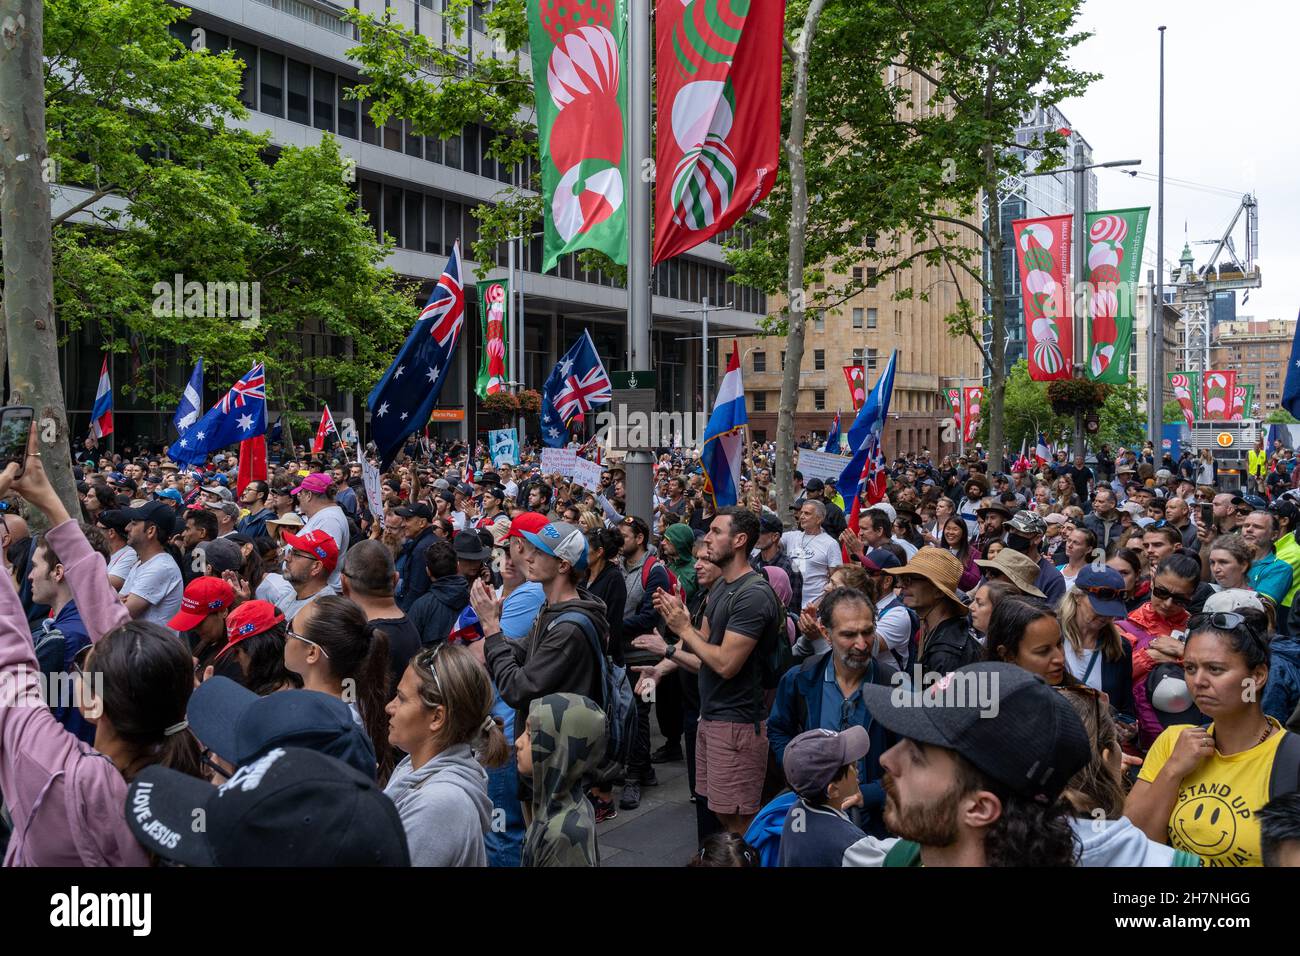 Protesting crowd against vaccine mandates, lockdown, restrictions in Martin Place in Sydney Australia on 20 Nov 2021. Hundreds of people at protest. Stock Photo